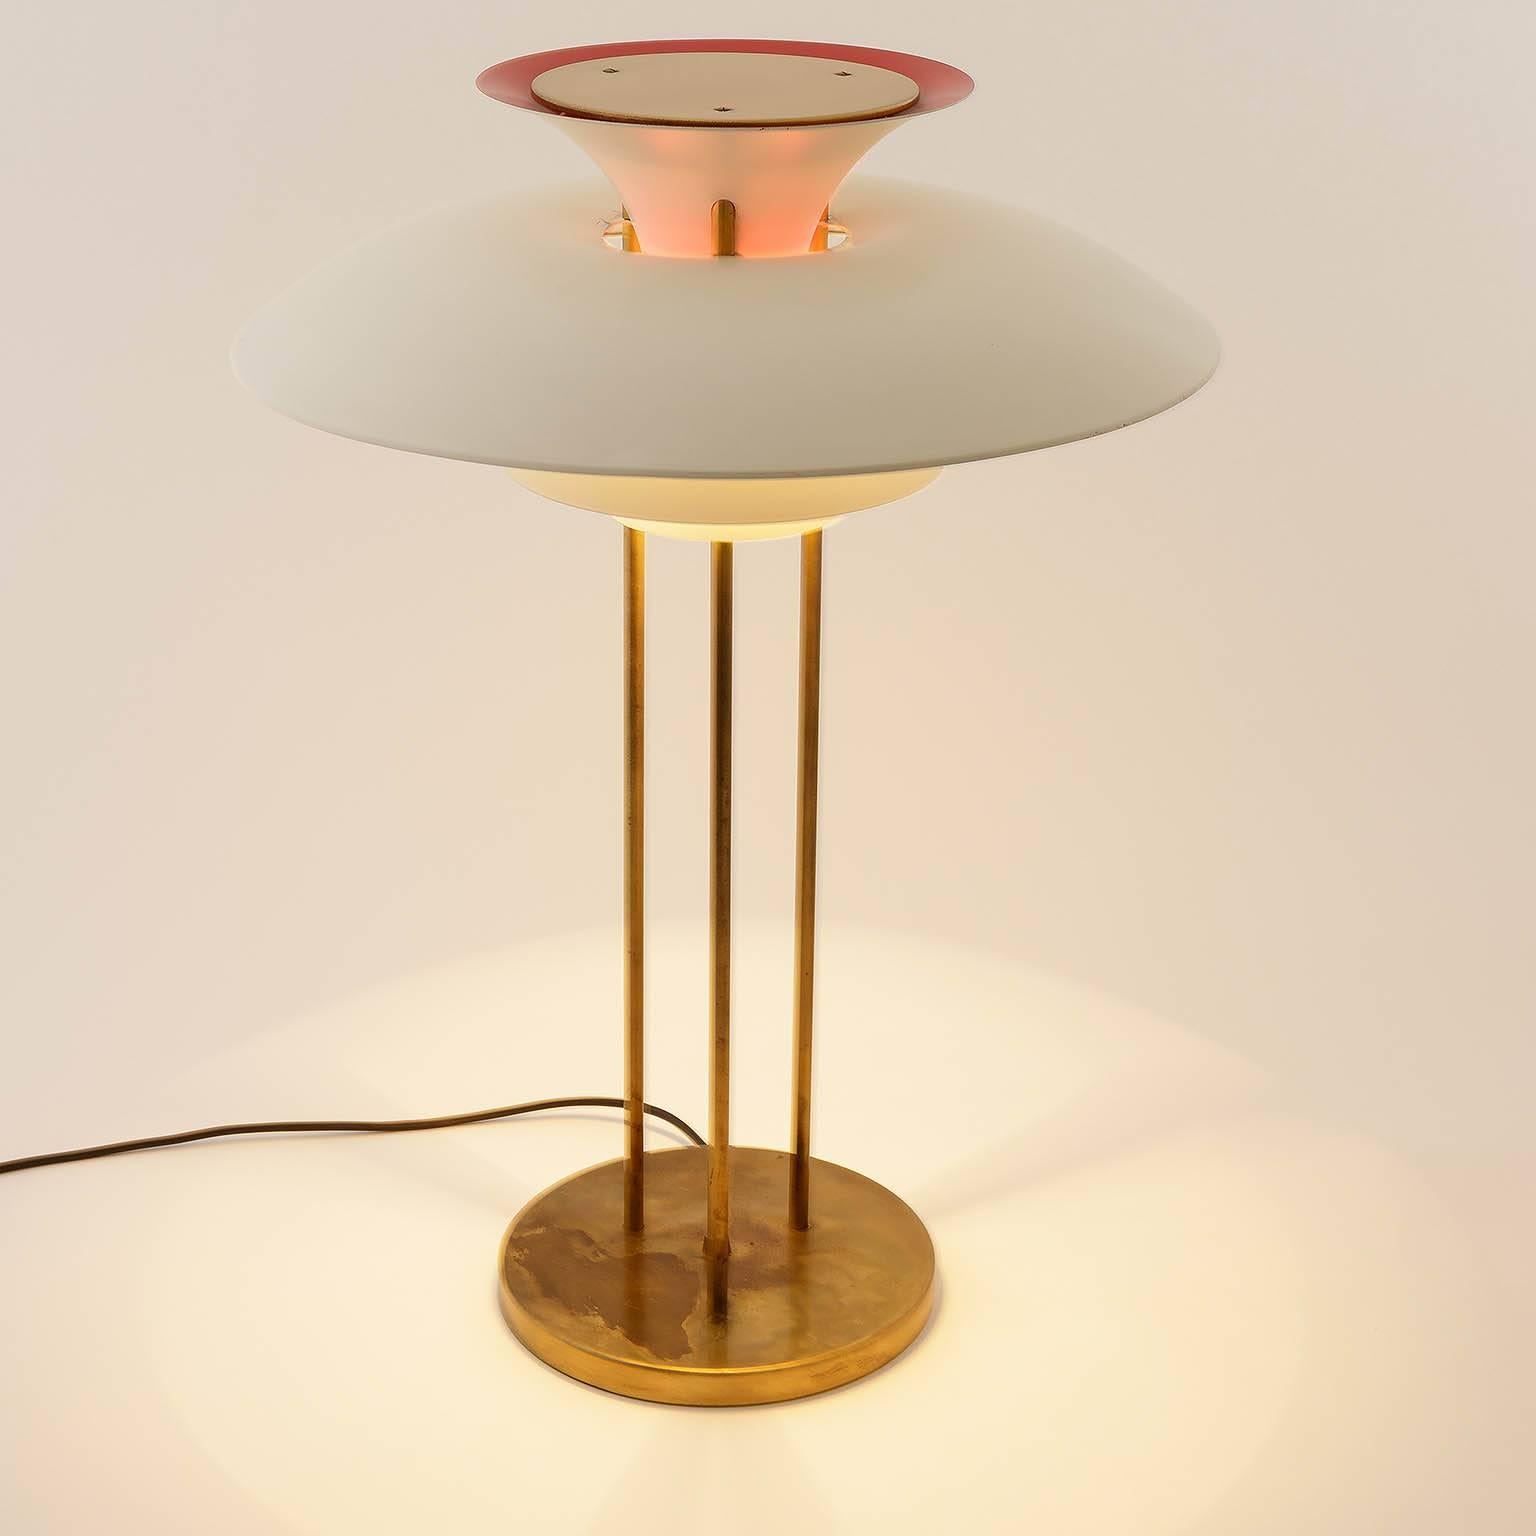 Mid-20th Century Table Lamp PH5 by Poul Henningsen for Louis Poulsen, Patinated Brass, 1960s